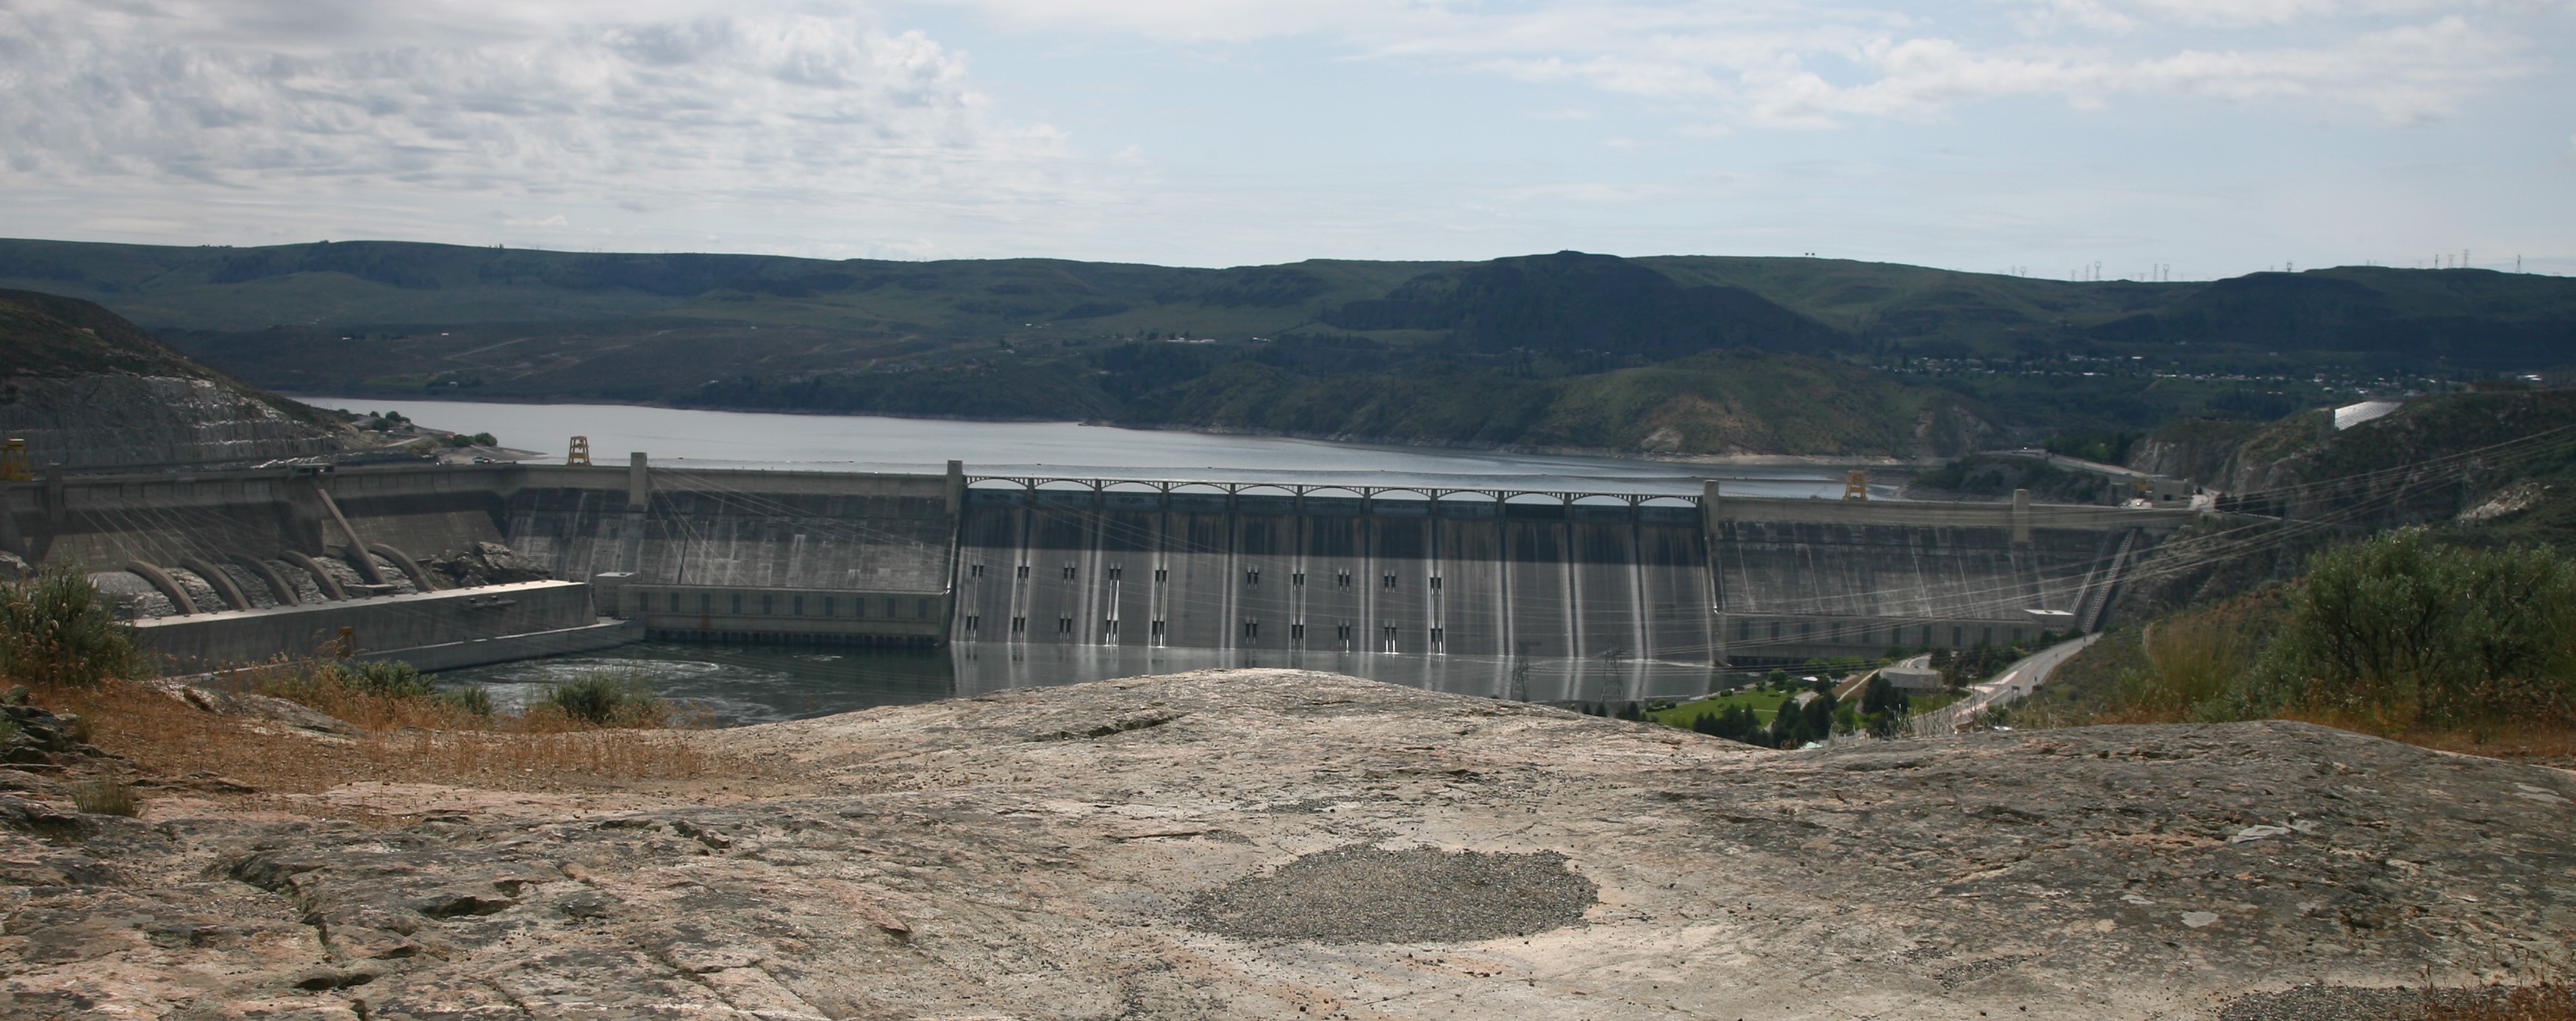 A view of Grand Coulee Dam from a cliff above it. The cliff is a smooth, light grey rock. Behind the concrete dam stretches a lake and rolling hills.